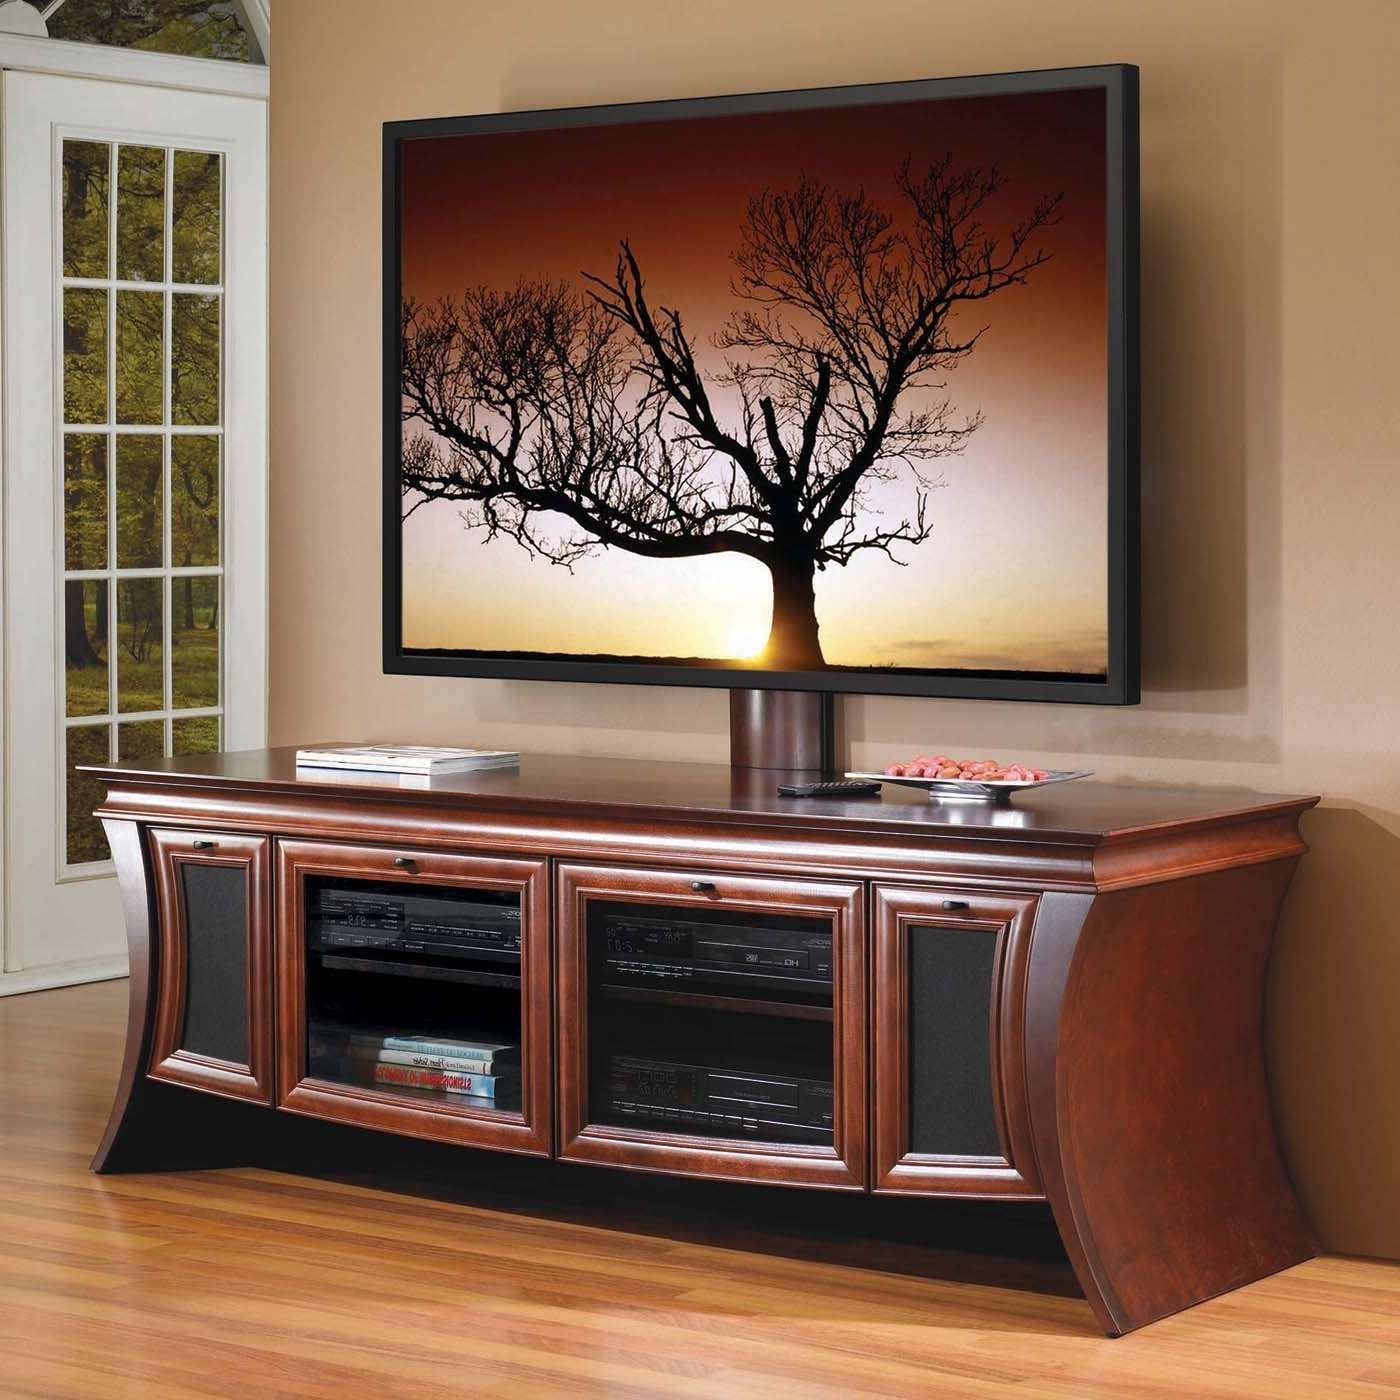 Featured Photo of The 15 Best Collection of Maple Tv Stands for Flat Screens